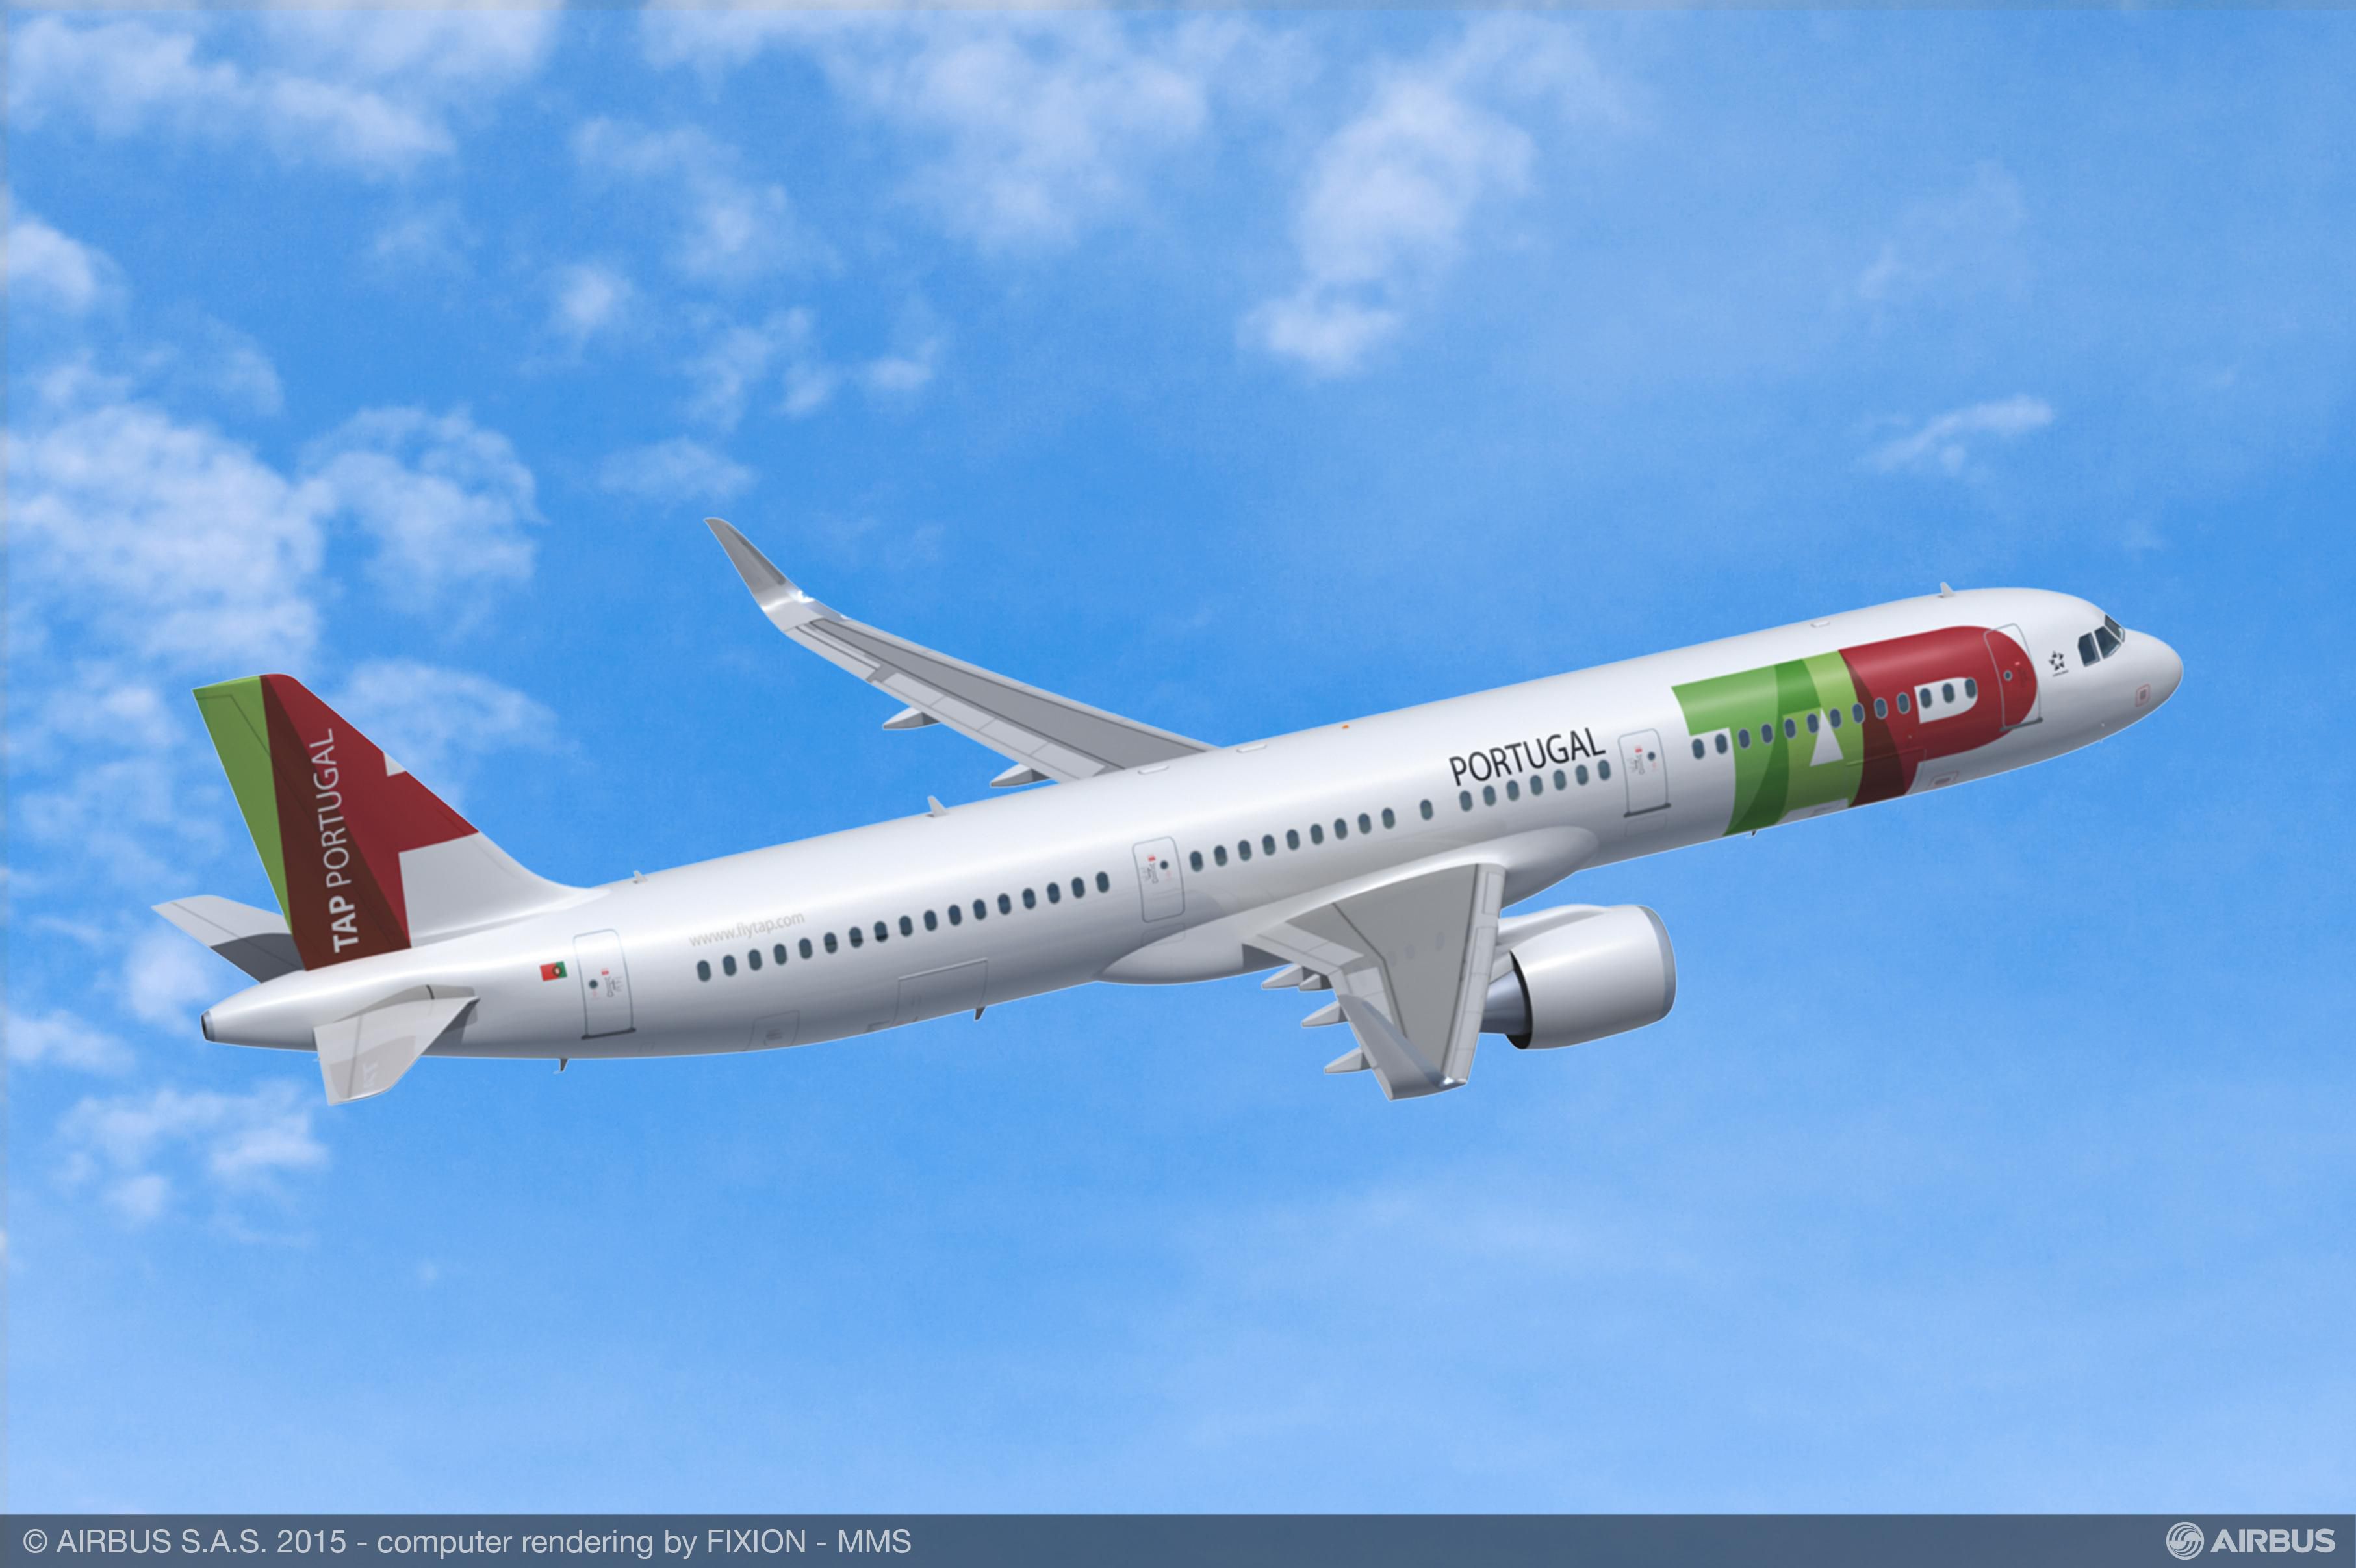 Tap Portugal Orders 14 A330 900neo And 39 A320neo Family